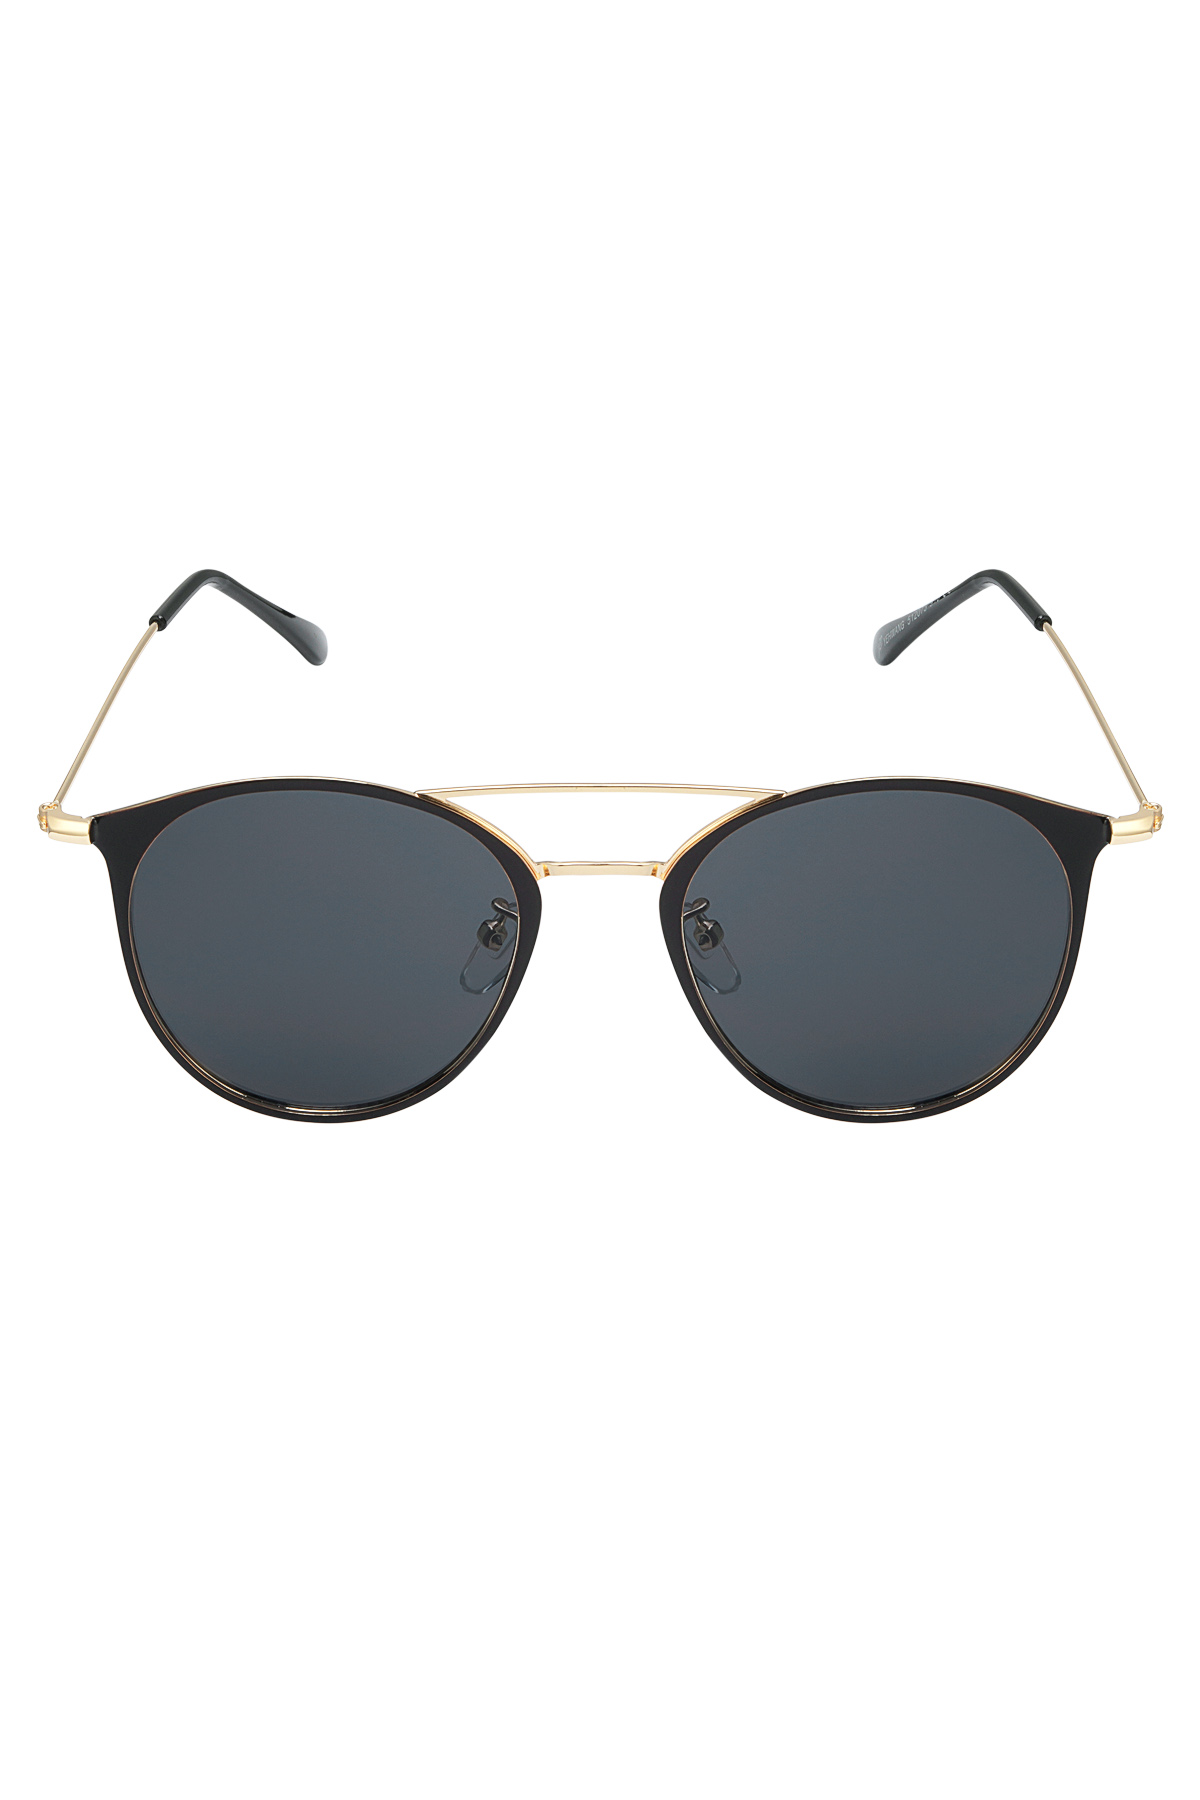 Sunglasses summer vibe - black/gold h5 Picture5